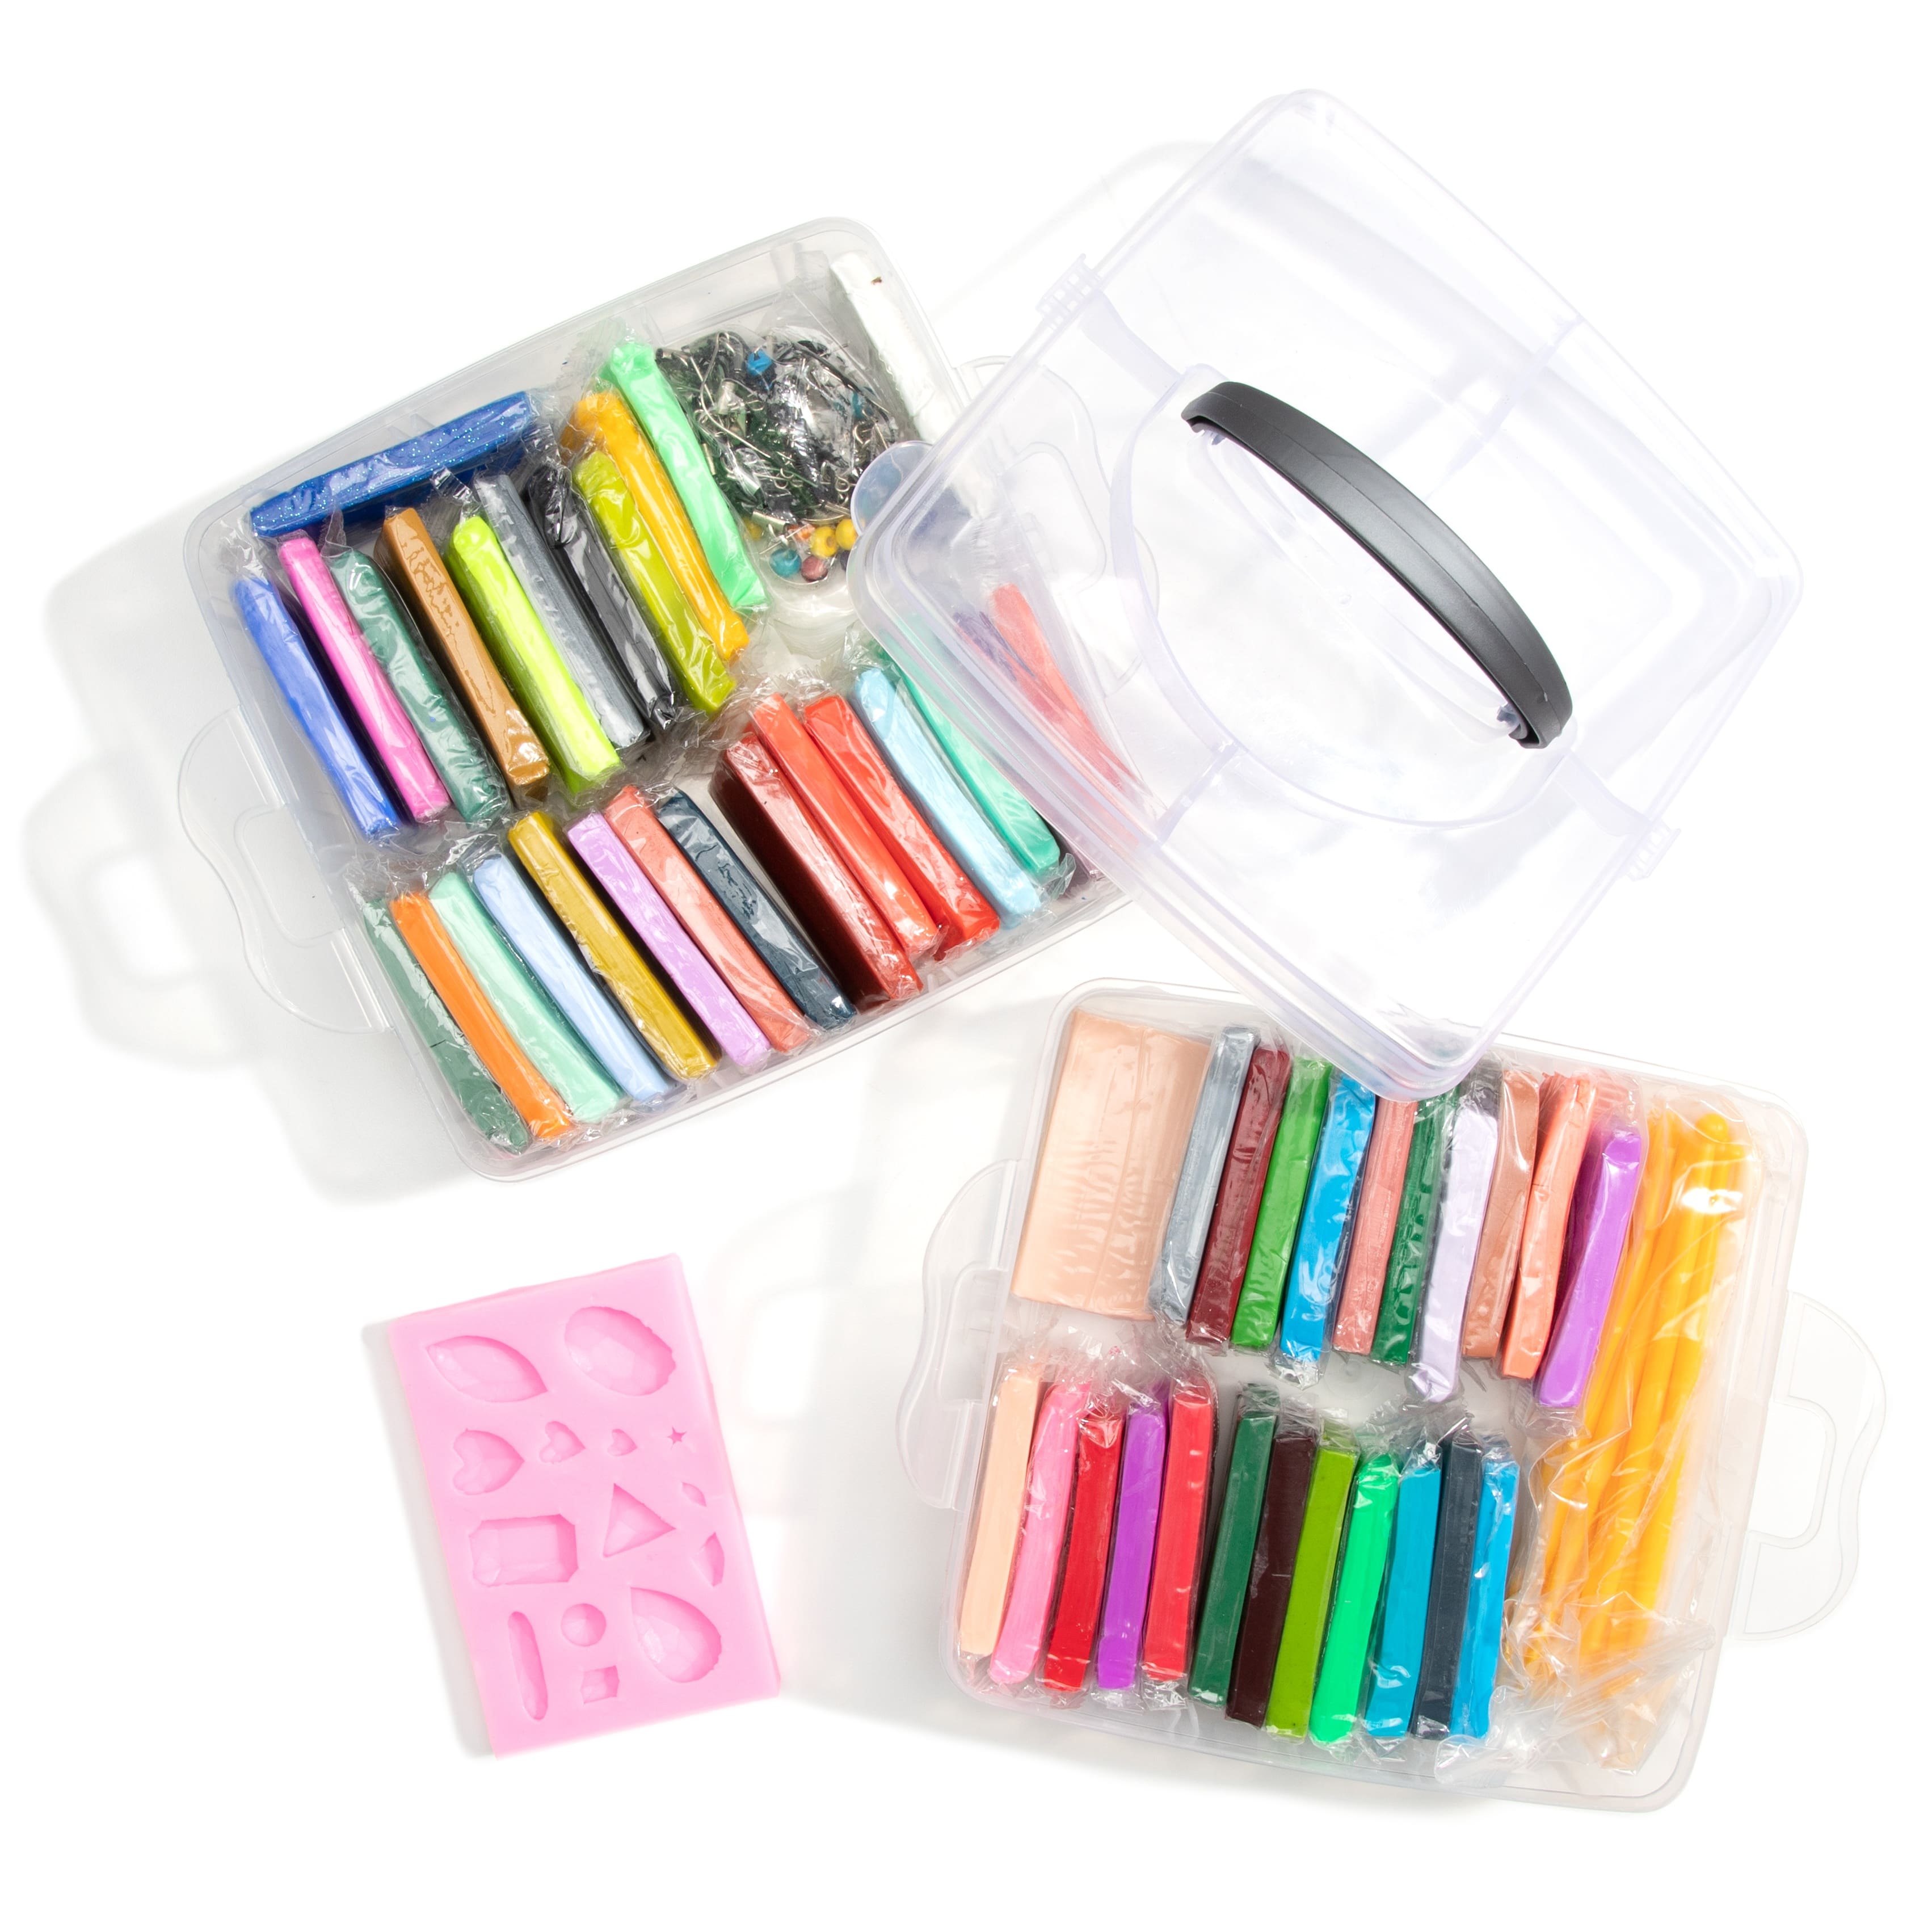 CousinDIY Multicolor Polymer Clay Jewelry Making Kit